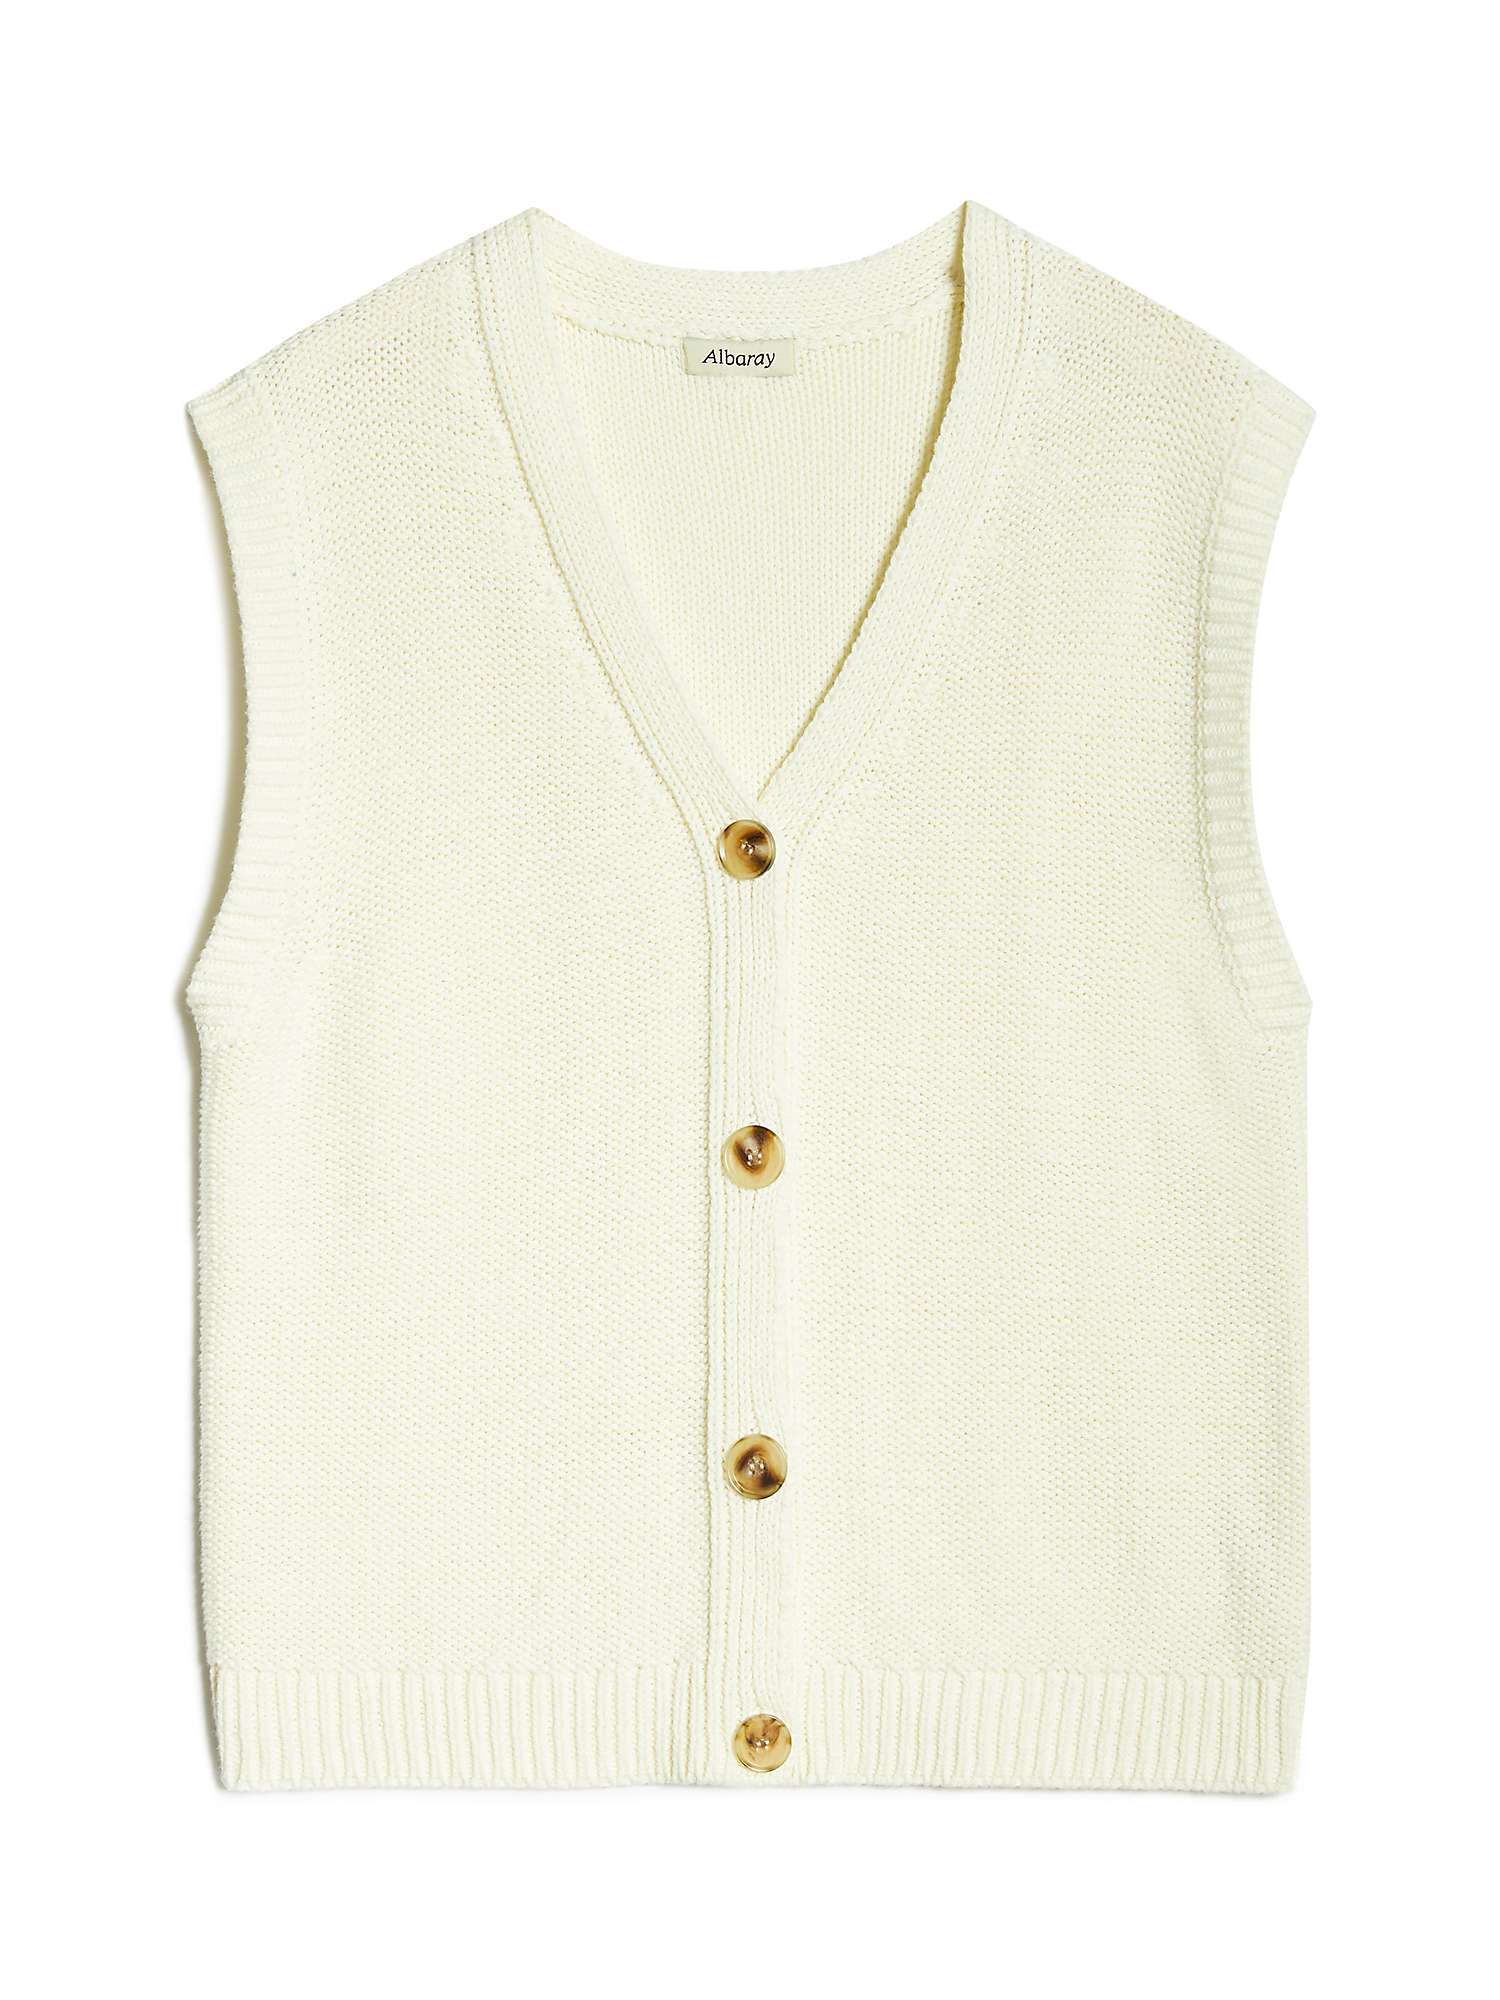 Buy Albaray Relaxed Knitted Waistcoat, Cream Online at johnlewis.com